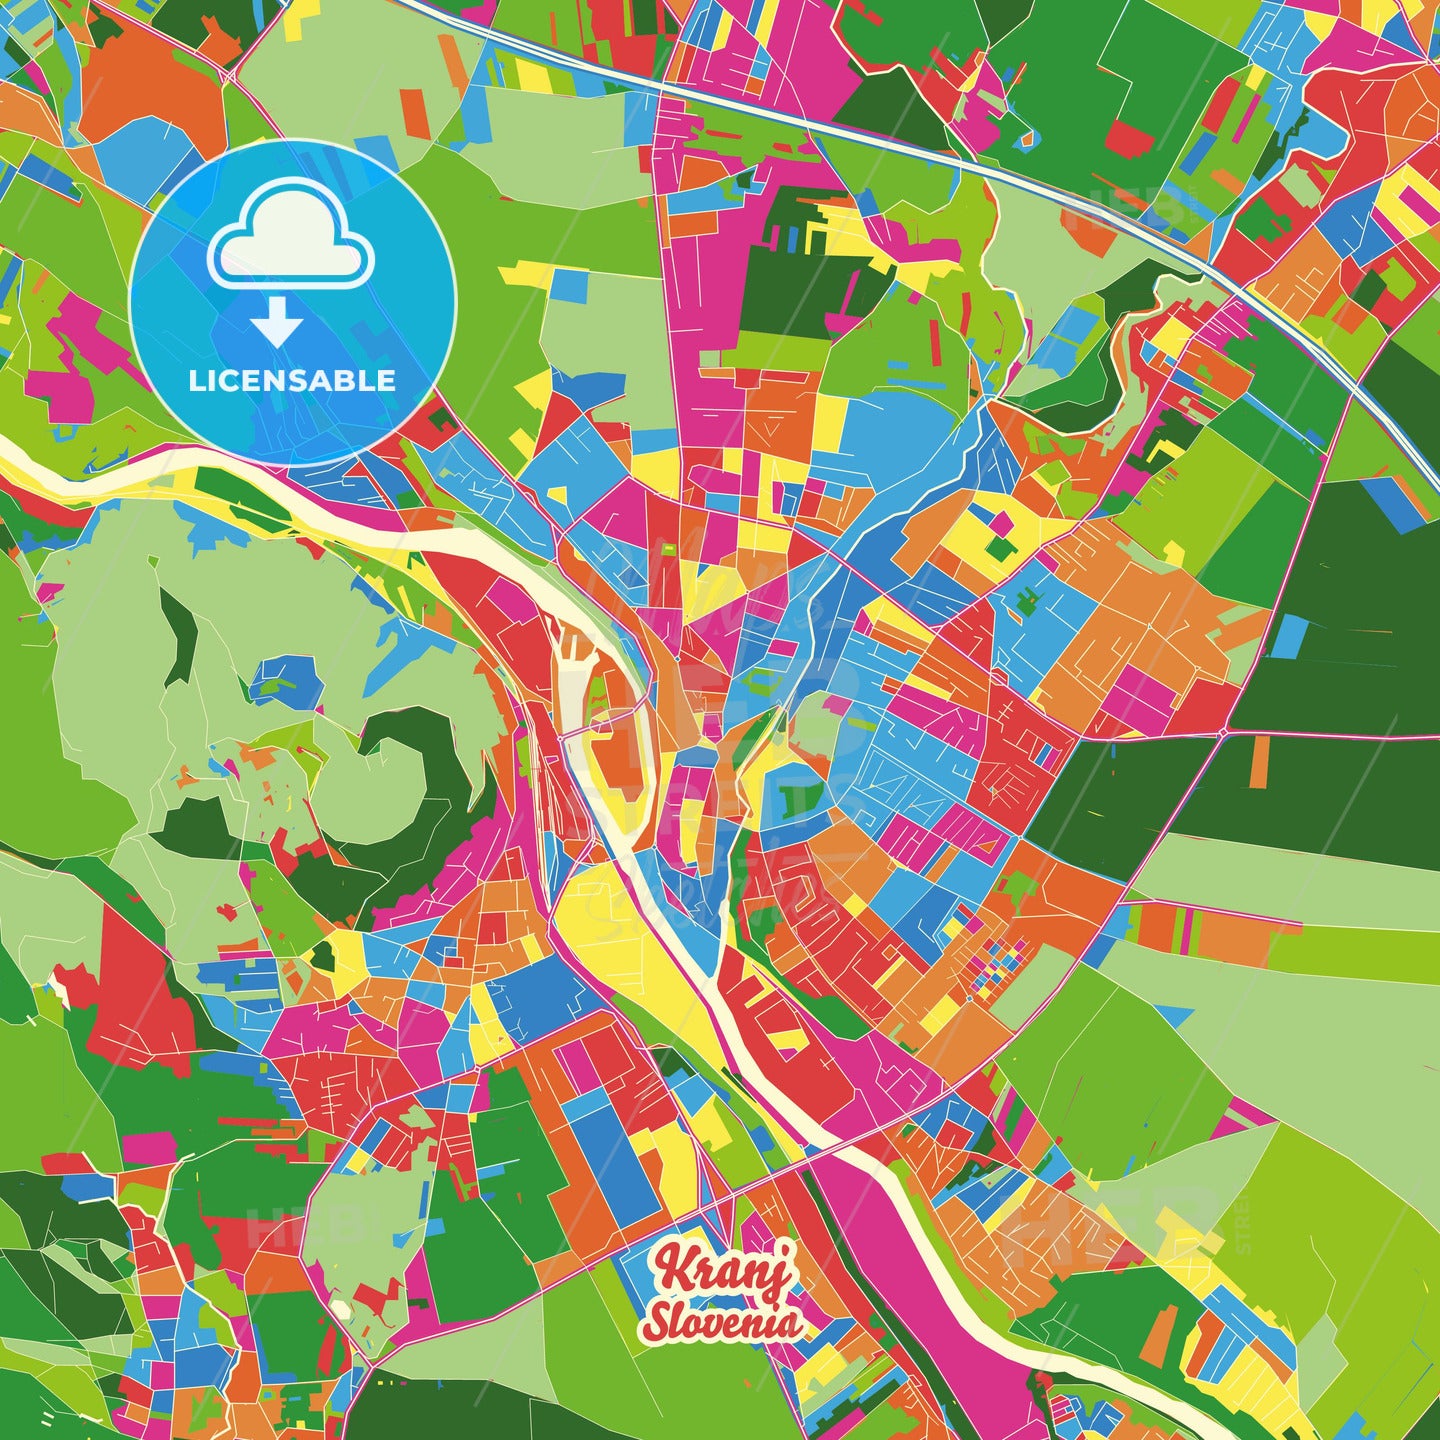 Kranj, Slovenia Crazy Colorful Street Map Poster Template - HEBSTREITS Sketches